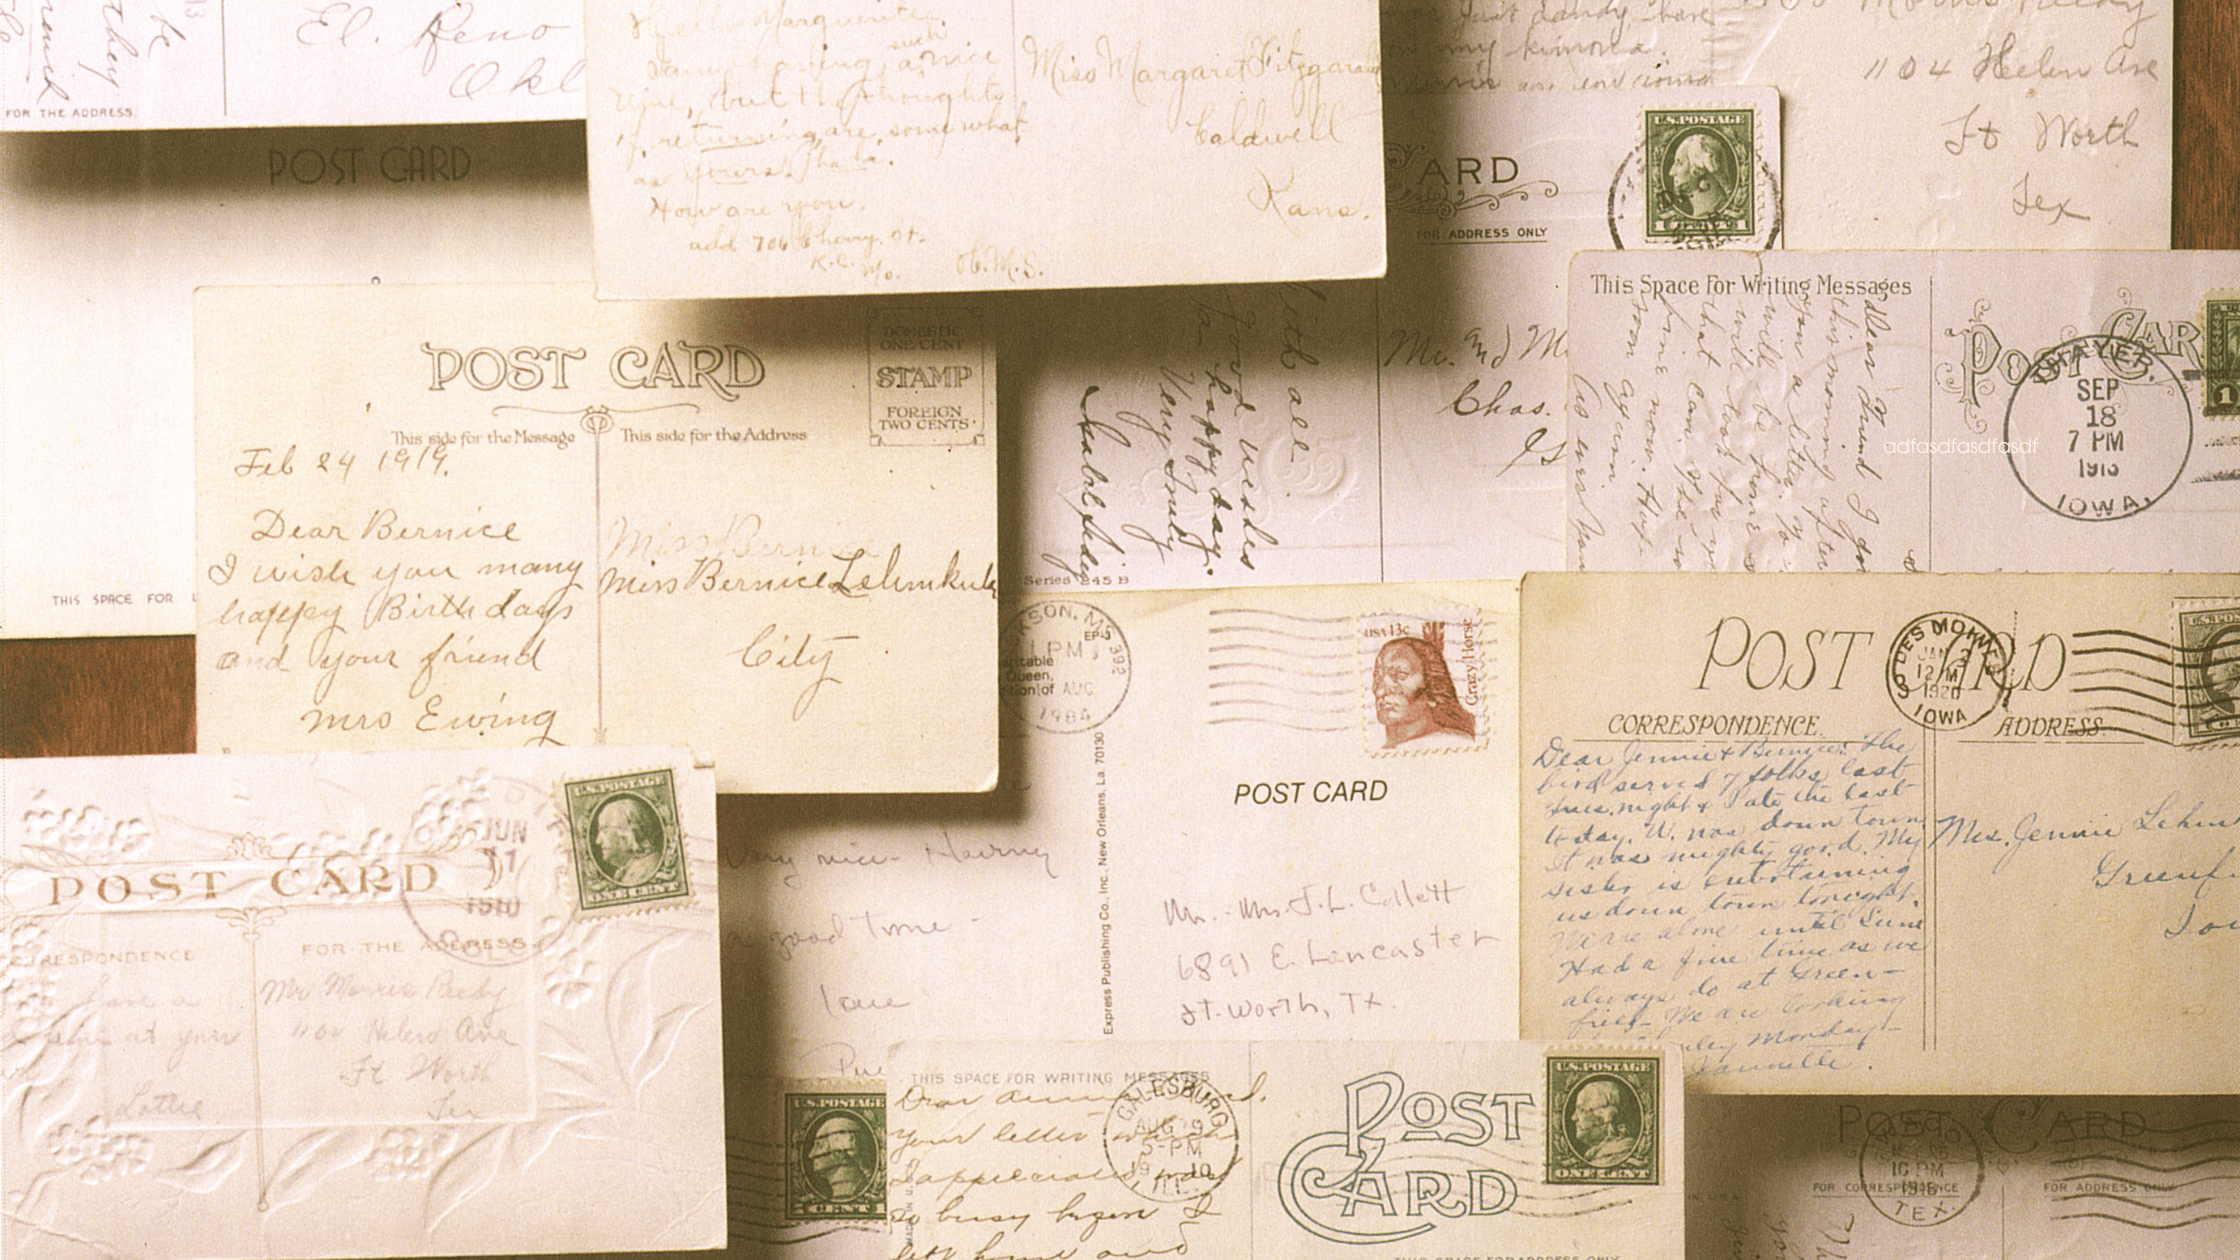 Beyond the Mail: The Many Uses of Postcards